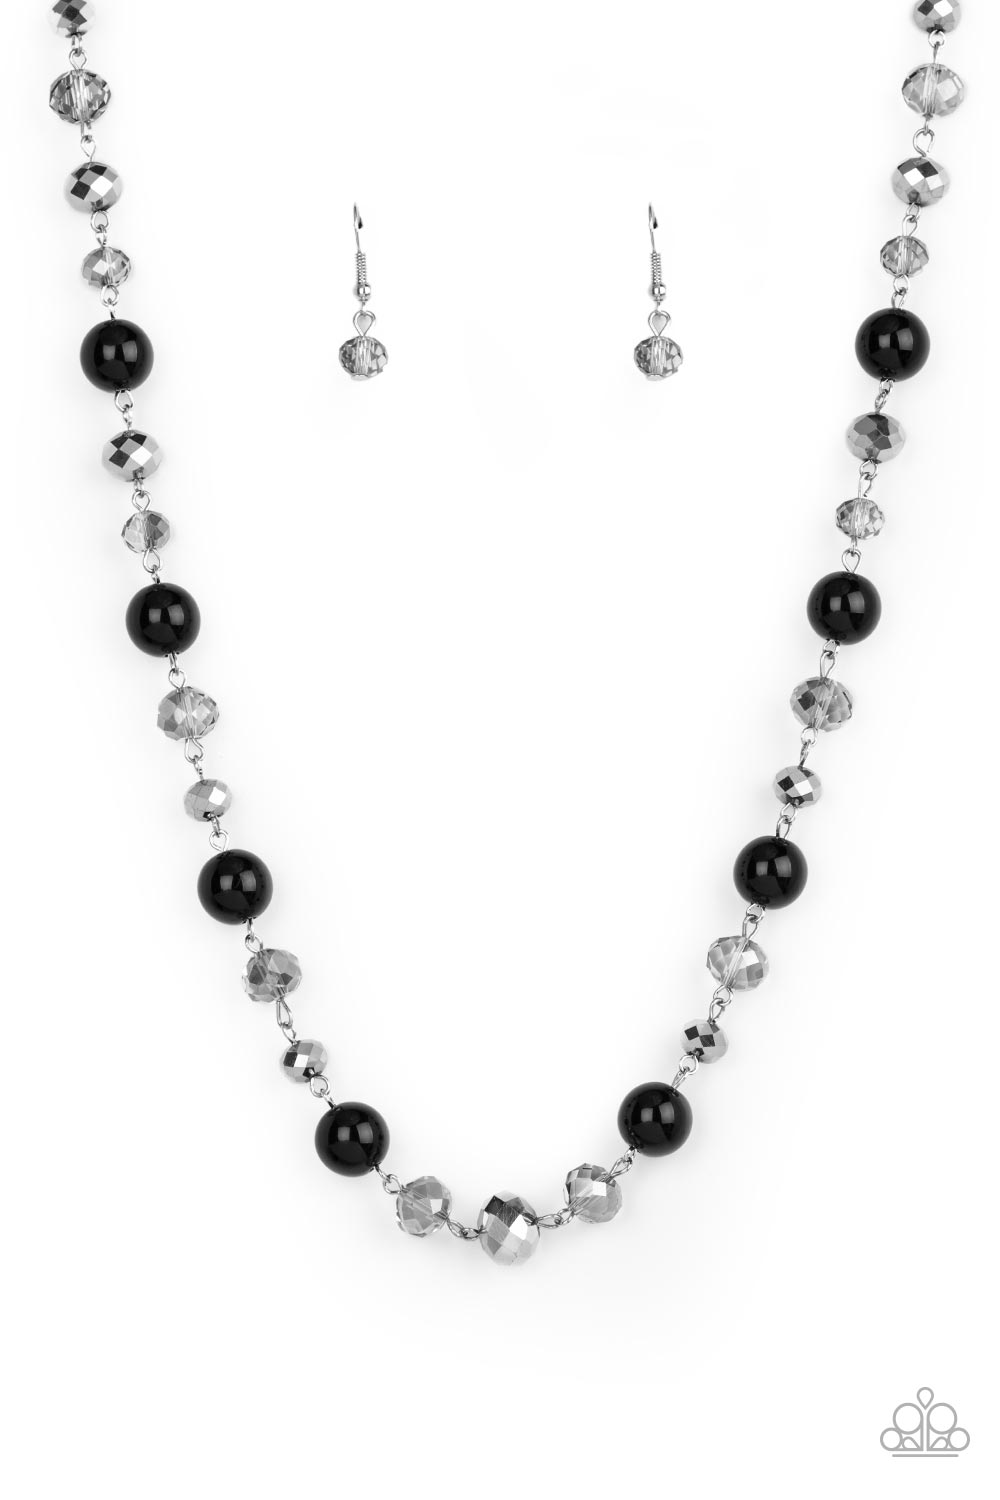 Necklace - Decked Out Dazzle - Black